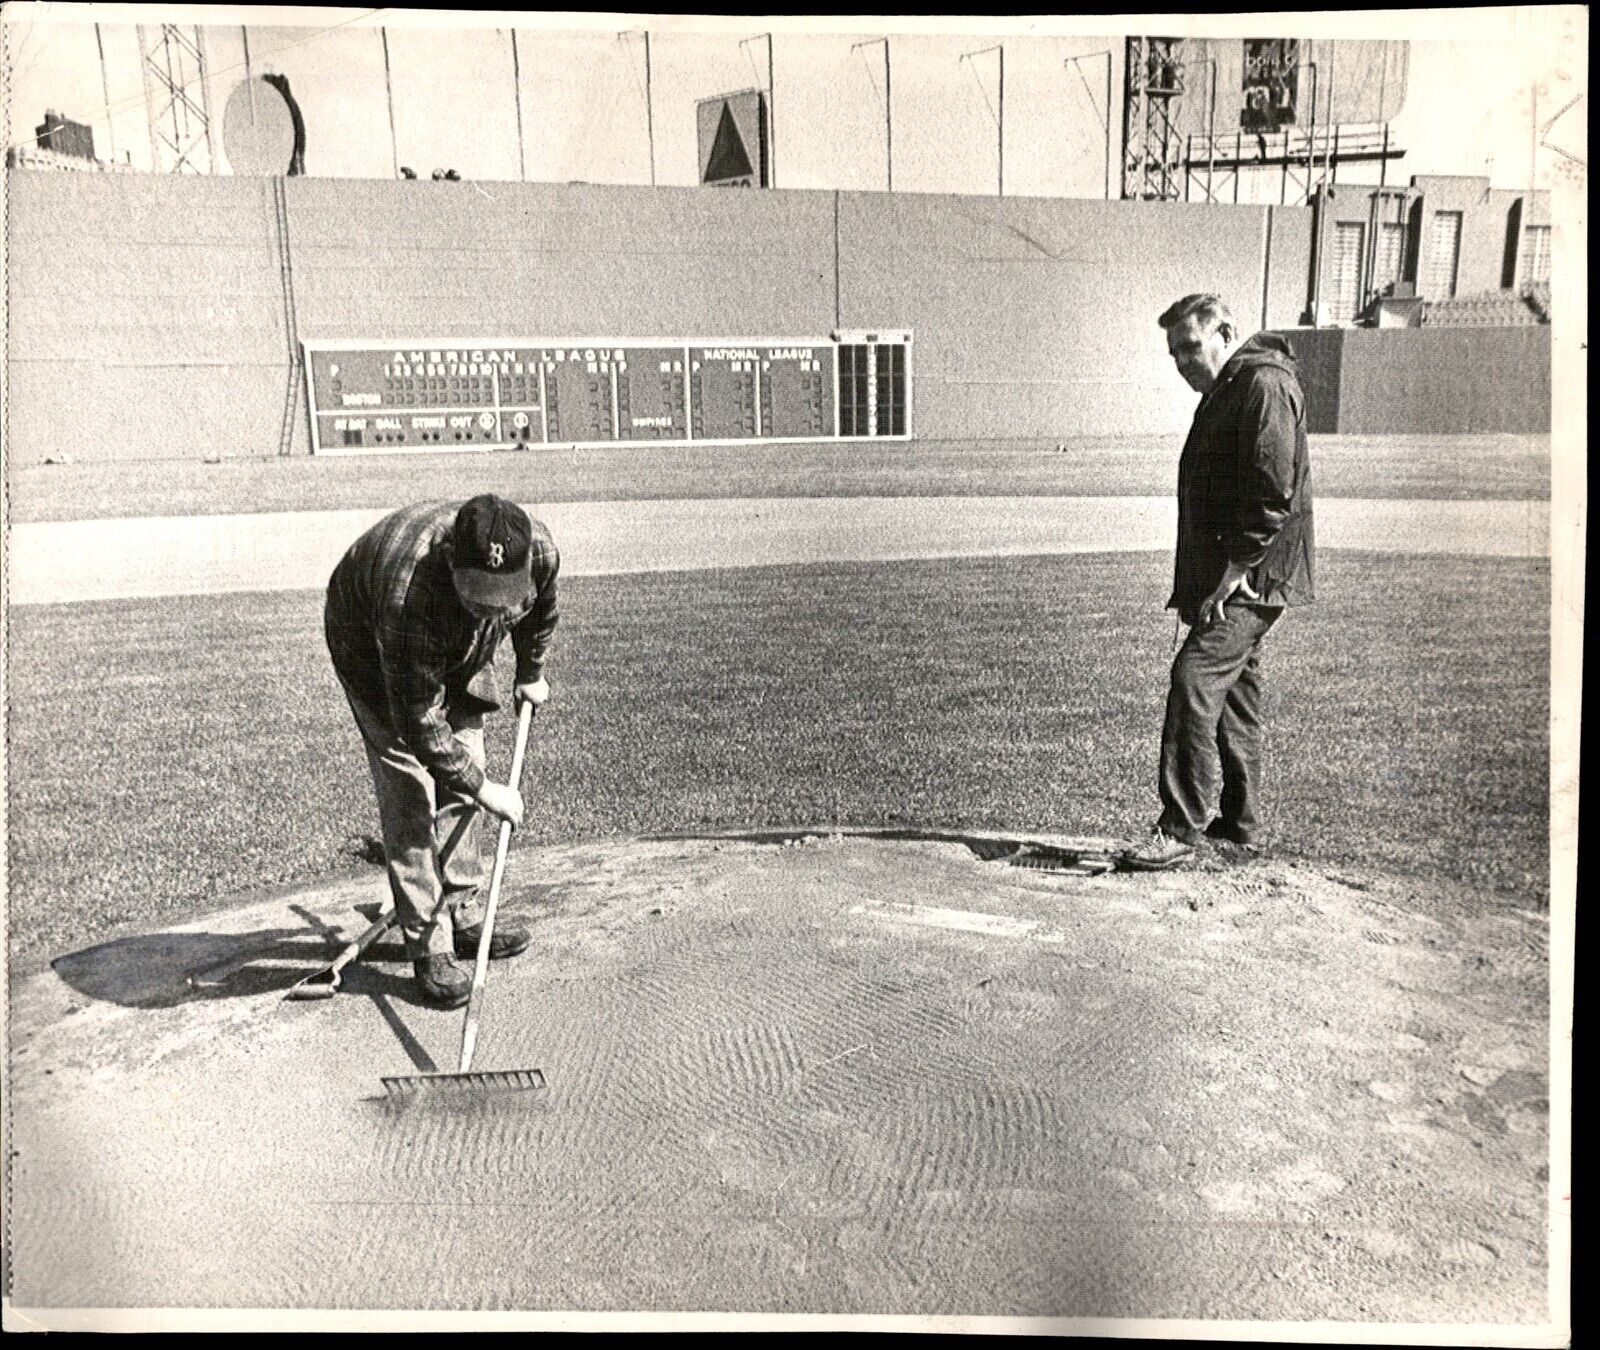 LD317 1971 Wire Photo BOSTON RED SOX GROUNDSKEEPERS PREP FOR NY YANKEES OPENER